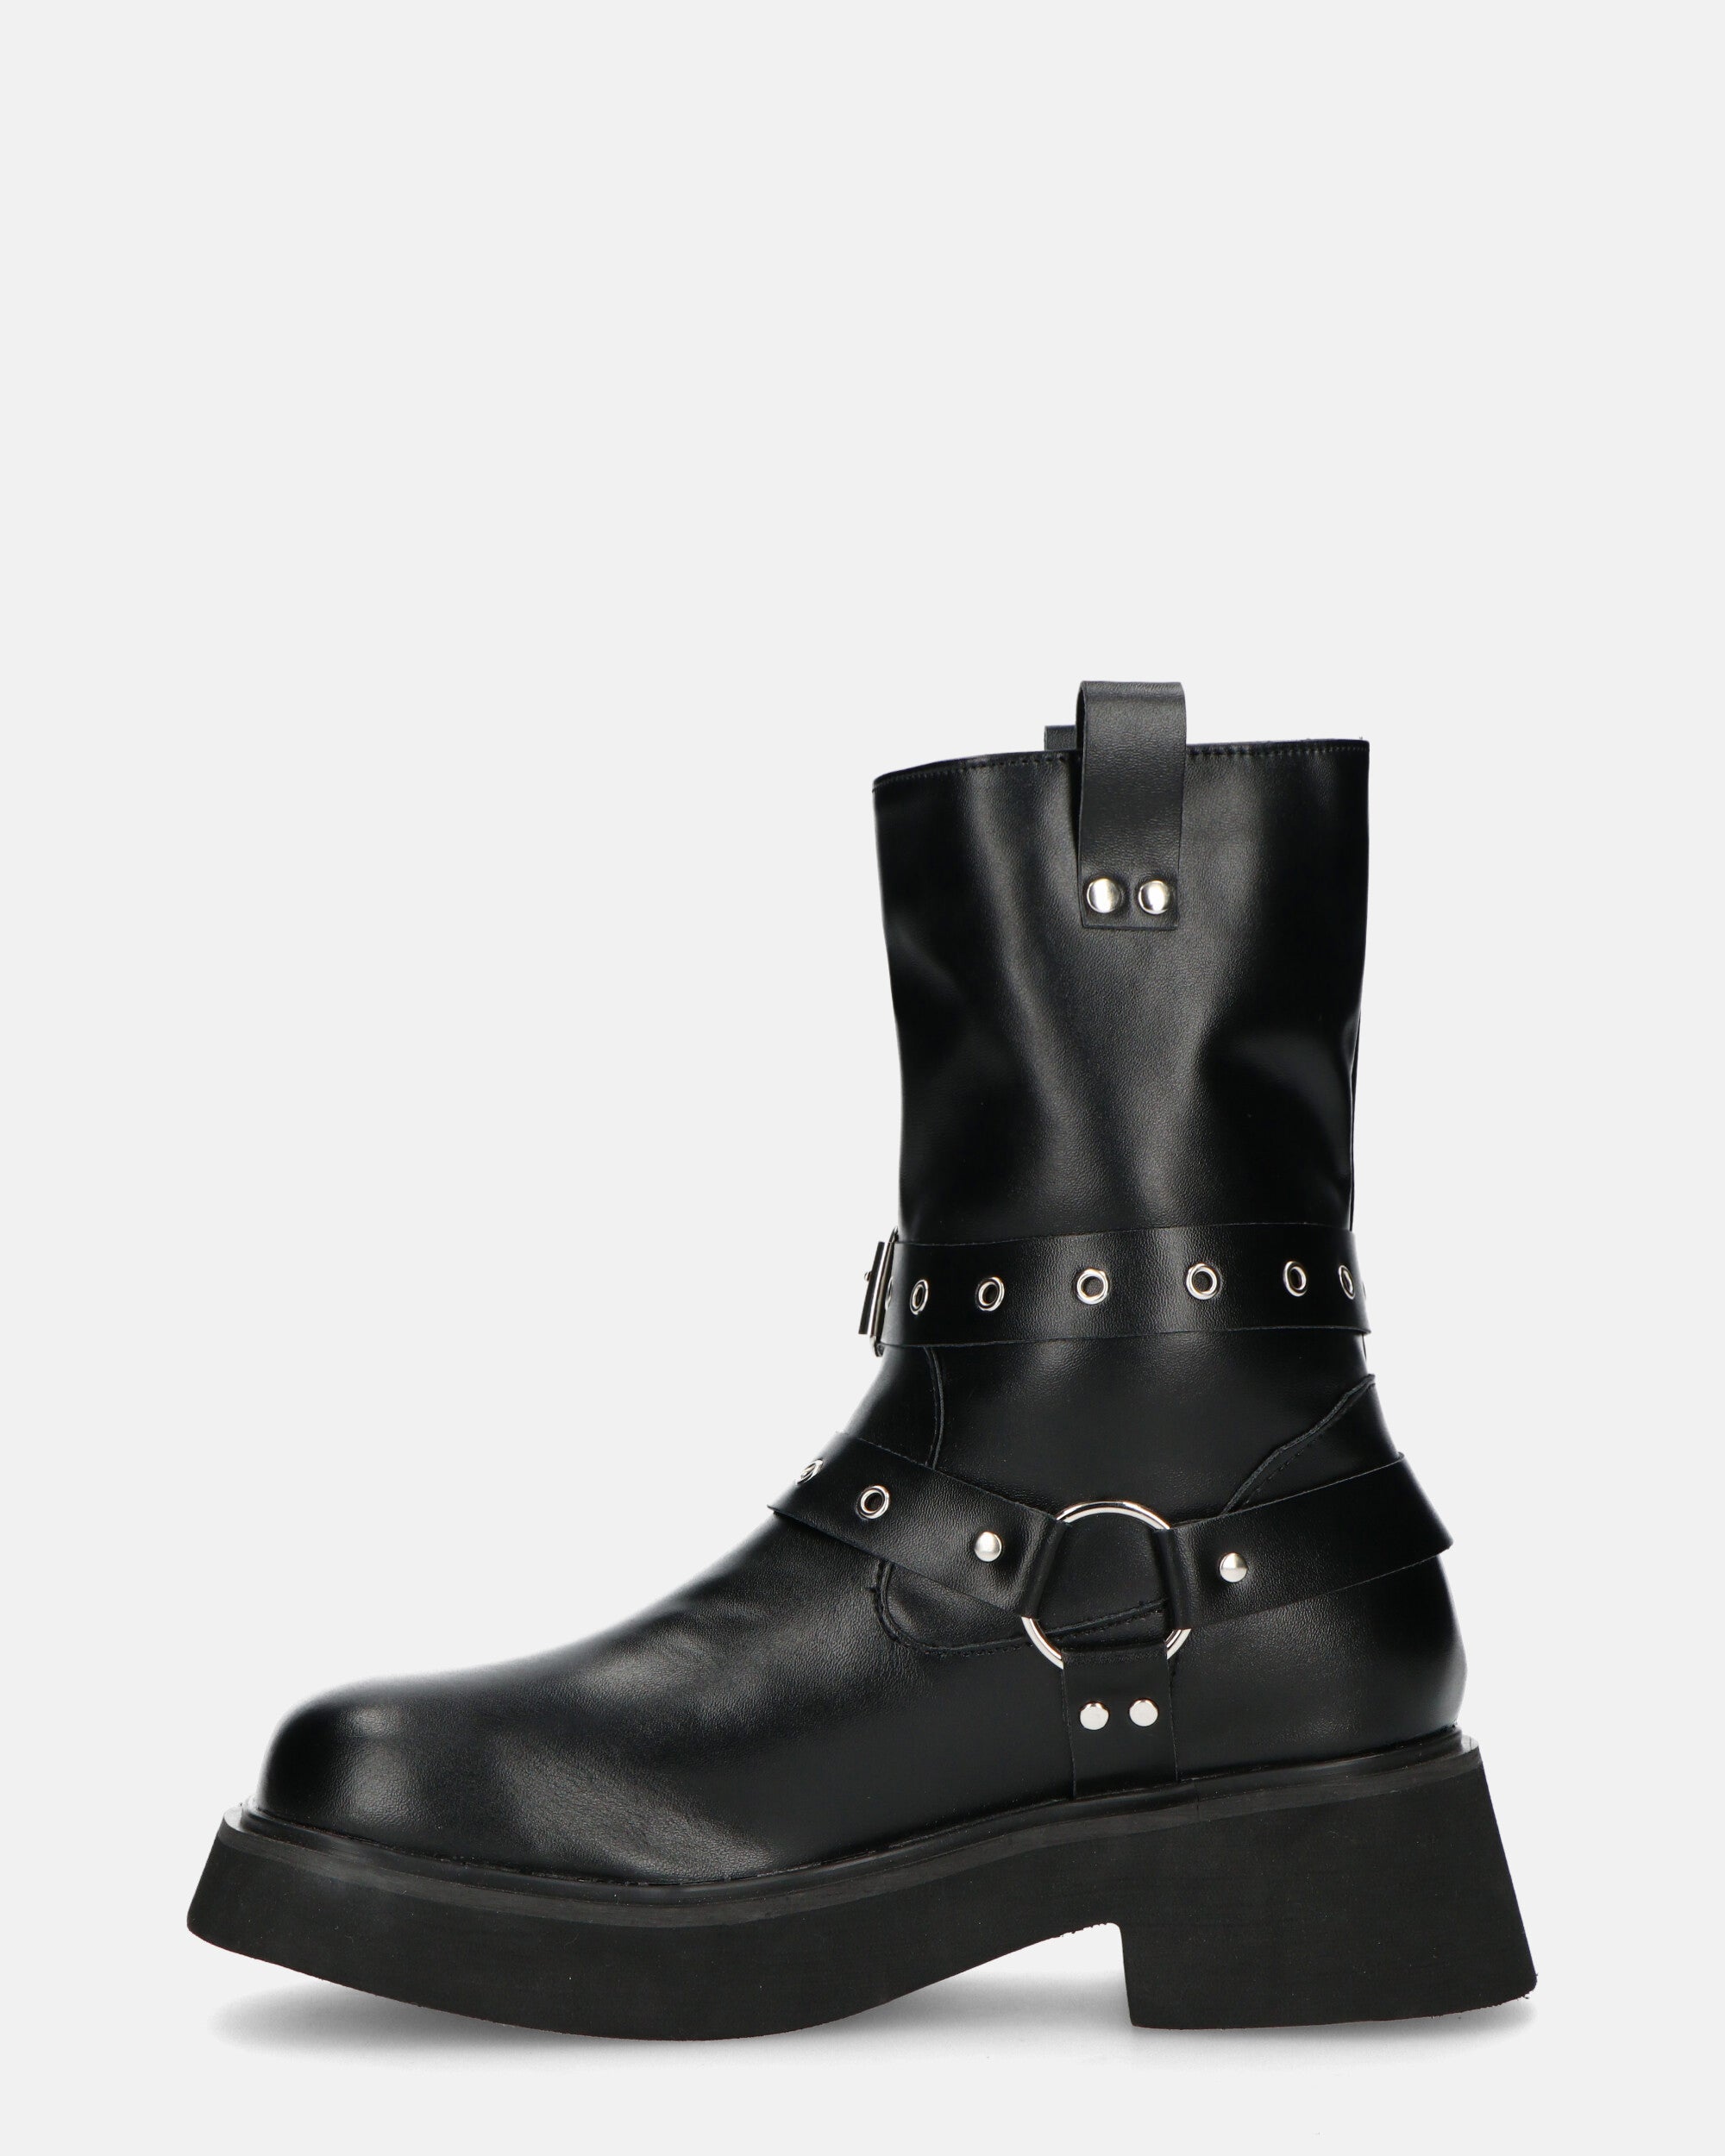 TOKIE - black amphibious ankle boots with straps